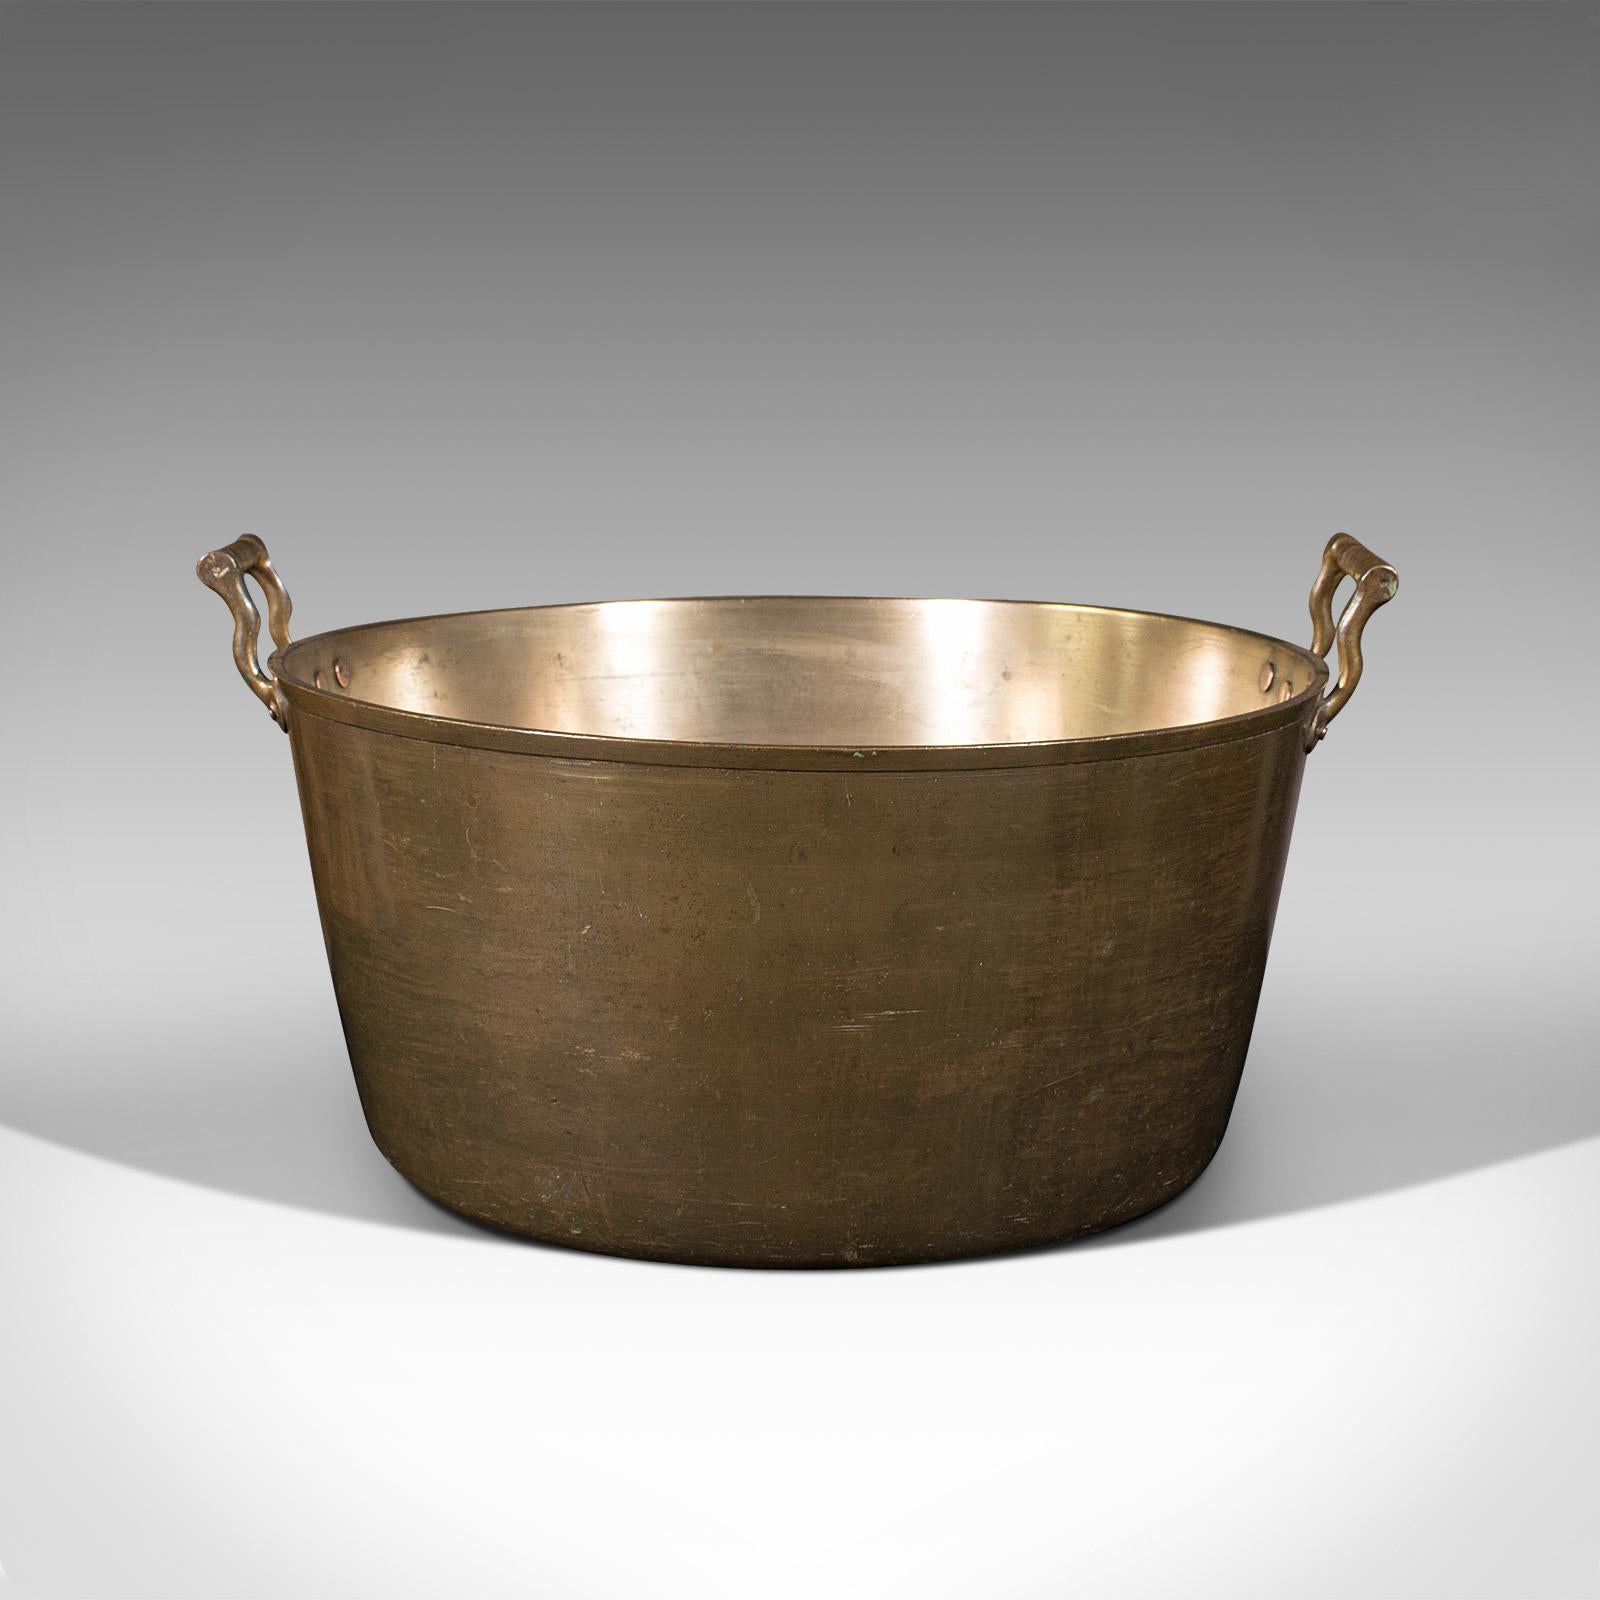 This is a large antique country house preserve pan. An English, bronze jam or cooking pot, dating to the Georgian period, circa 1800.

Of superior proportion for the larger batch
Displays a desirable aged patina throughout
Naturally weathered